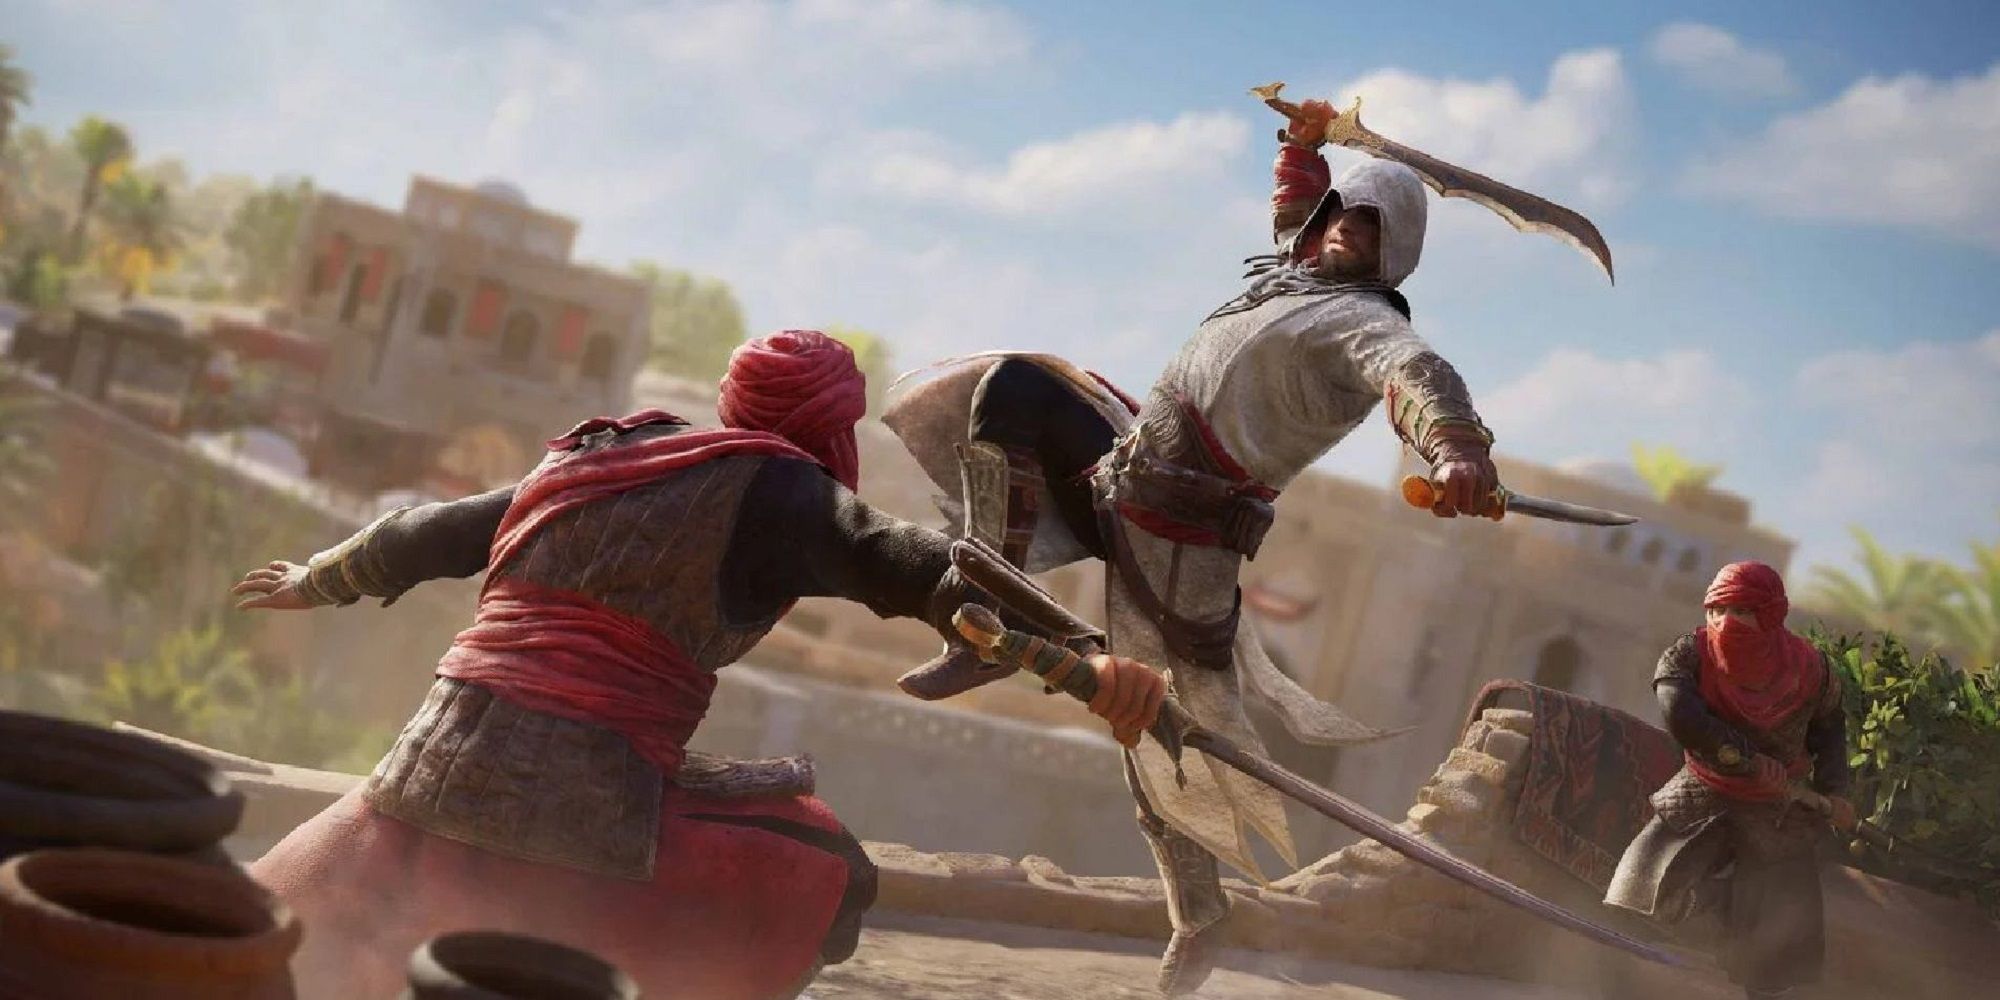 Basim Jumping And Swinging Blade At Red Enemy With Another Behind Him Assassin's Creed Mirage